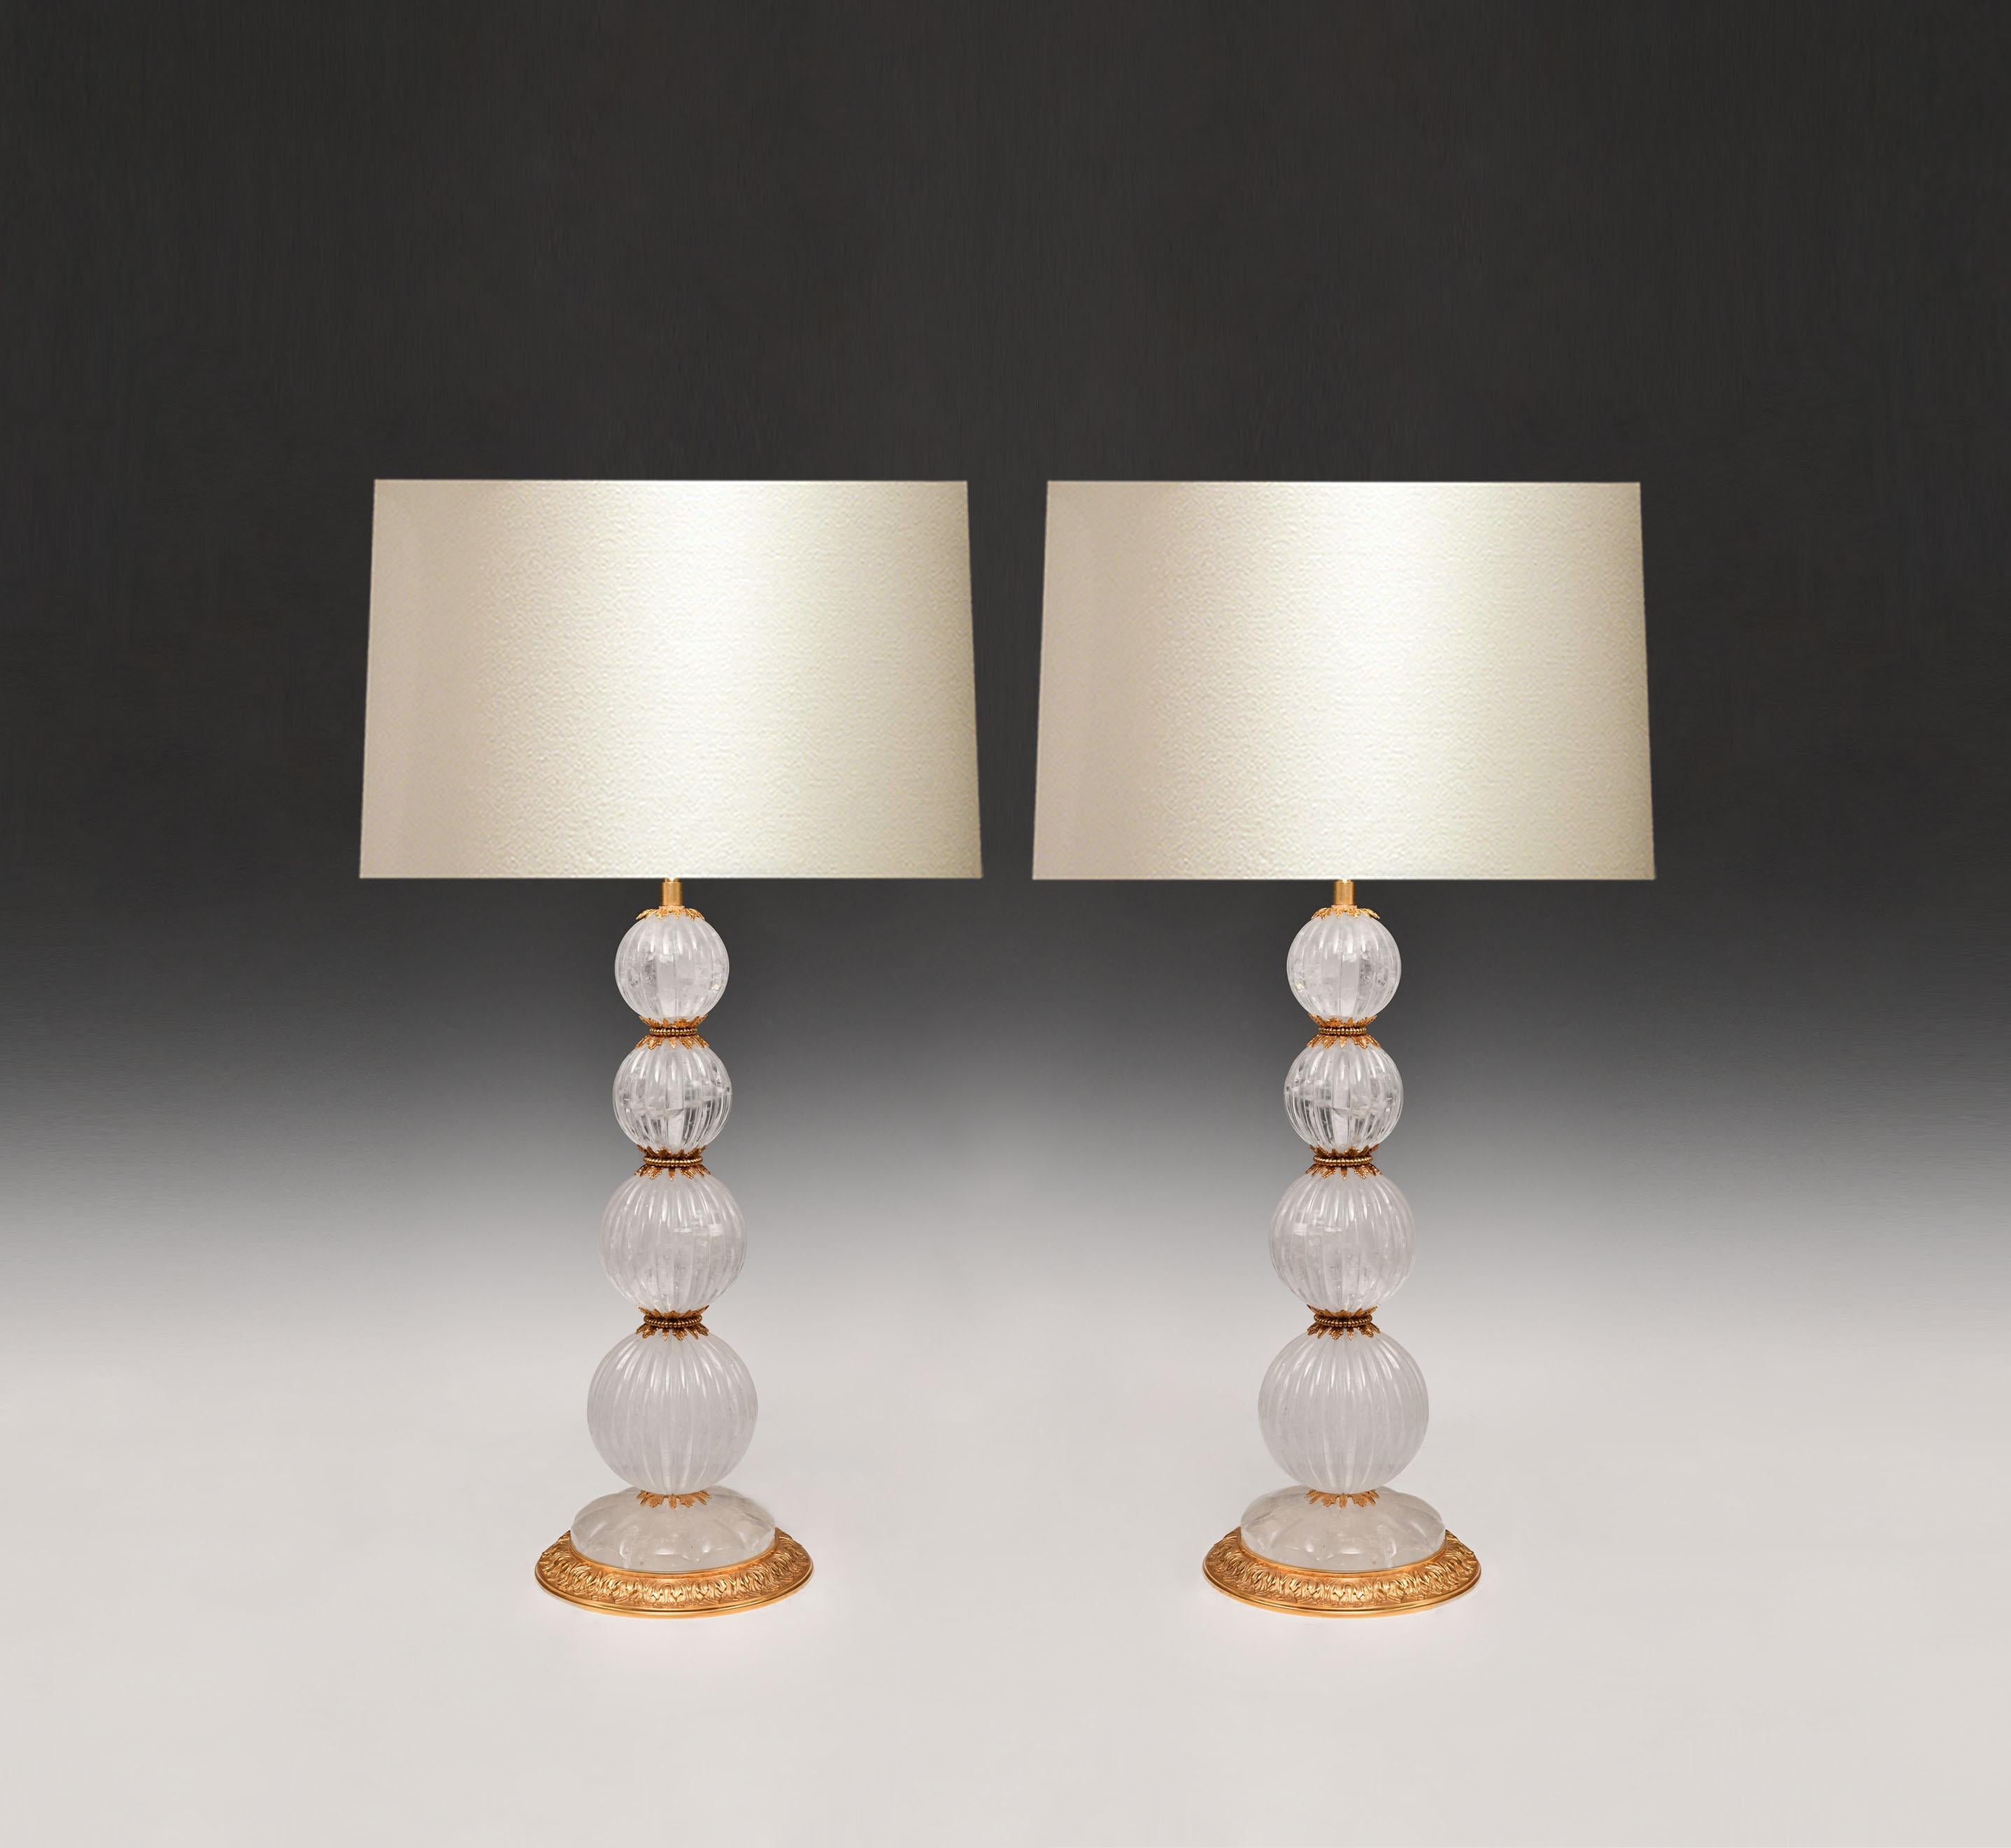 Pair of Fine carved globes ormolu-mounted rock crystal lamps. 
To the top of rack crystal: 19